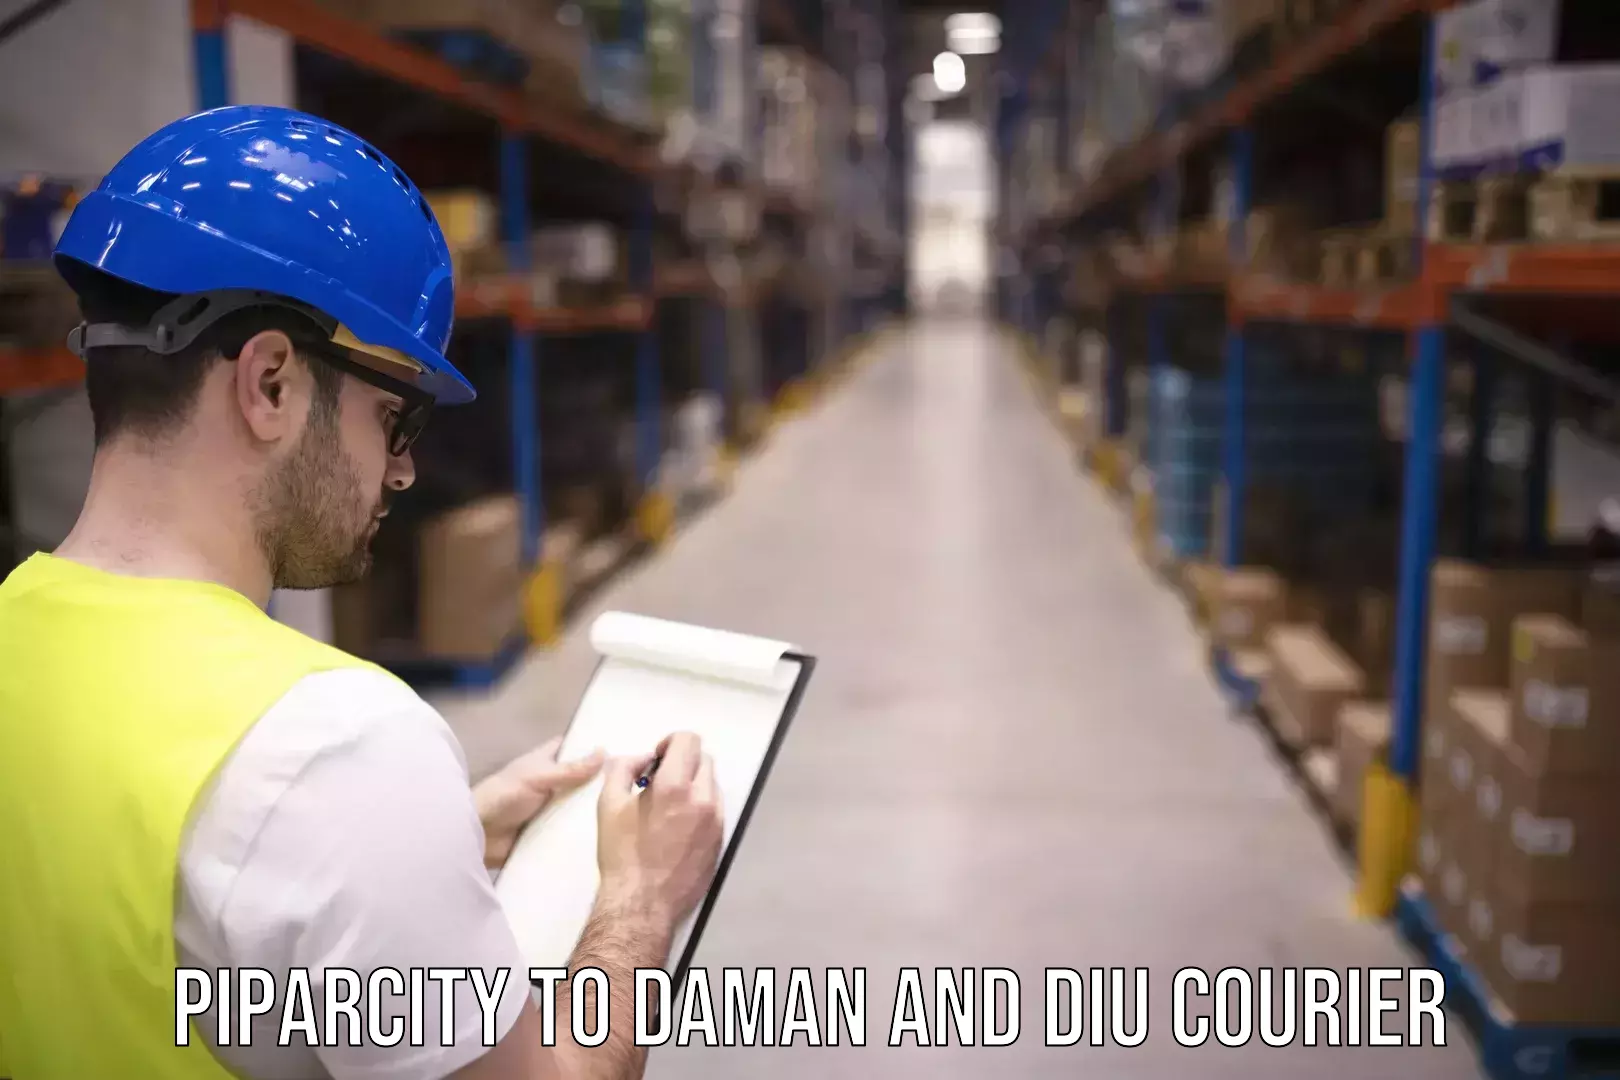 Courier service partnerships Piparcity to Daman and Diu